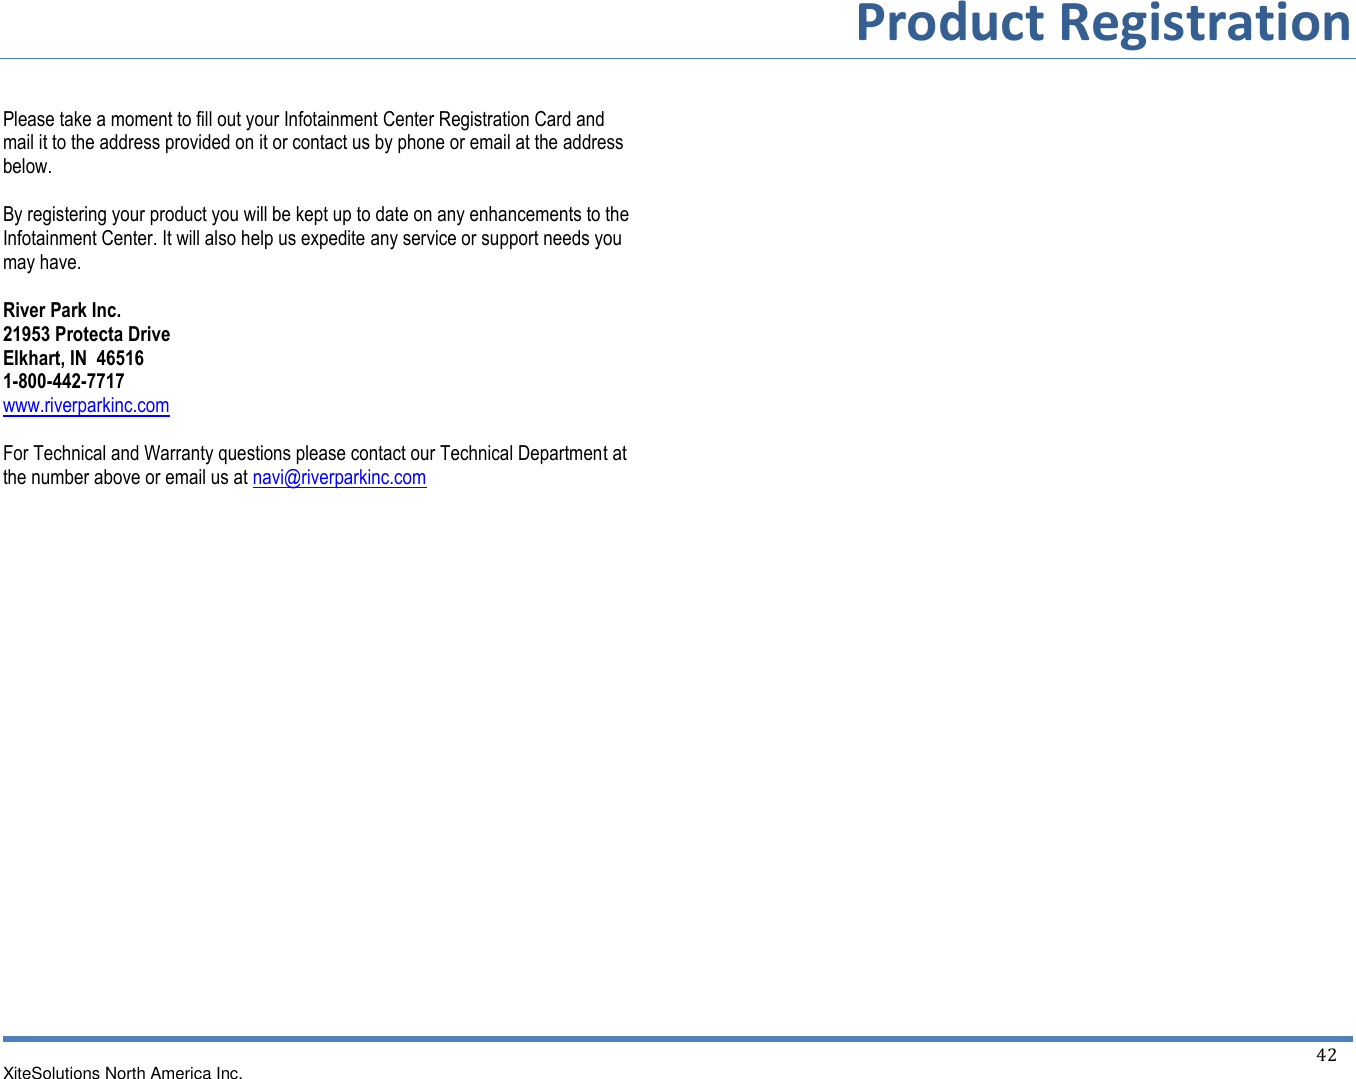        Product Registration  XiteSolutions North America Inc.    42   Please take a moment to fill out your Infotainment Center Registration Card and mail it to the address provided on it or contact us by phone or email at the address below.  By registering your product you will be kept up to date on any enhancements to the Infotainment Center. It will also help us expedite any service or support needs you may have.  River Park Inc. 21953 Protecta Drive Elkhart, IN  46516 1-800-442-7717 www.riverparkinc.com  For Technical and Warranty questions please contact our Technical Department at the number above or email us at navi@riverparkinc.com 